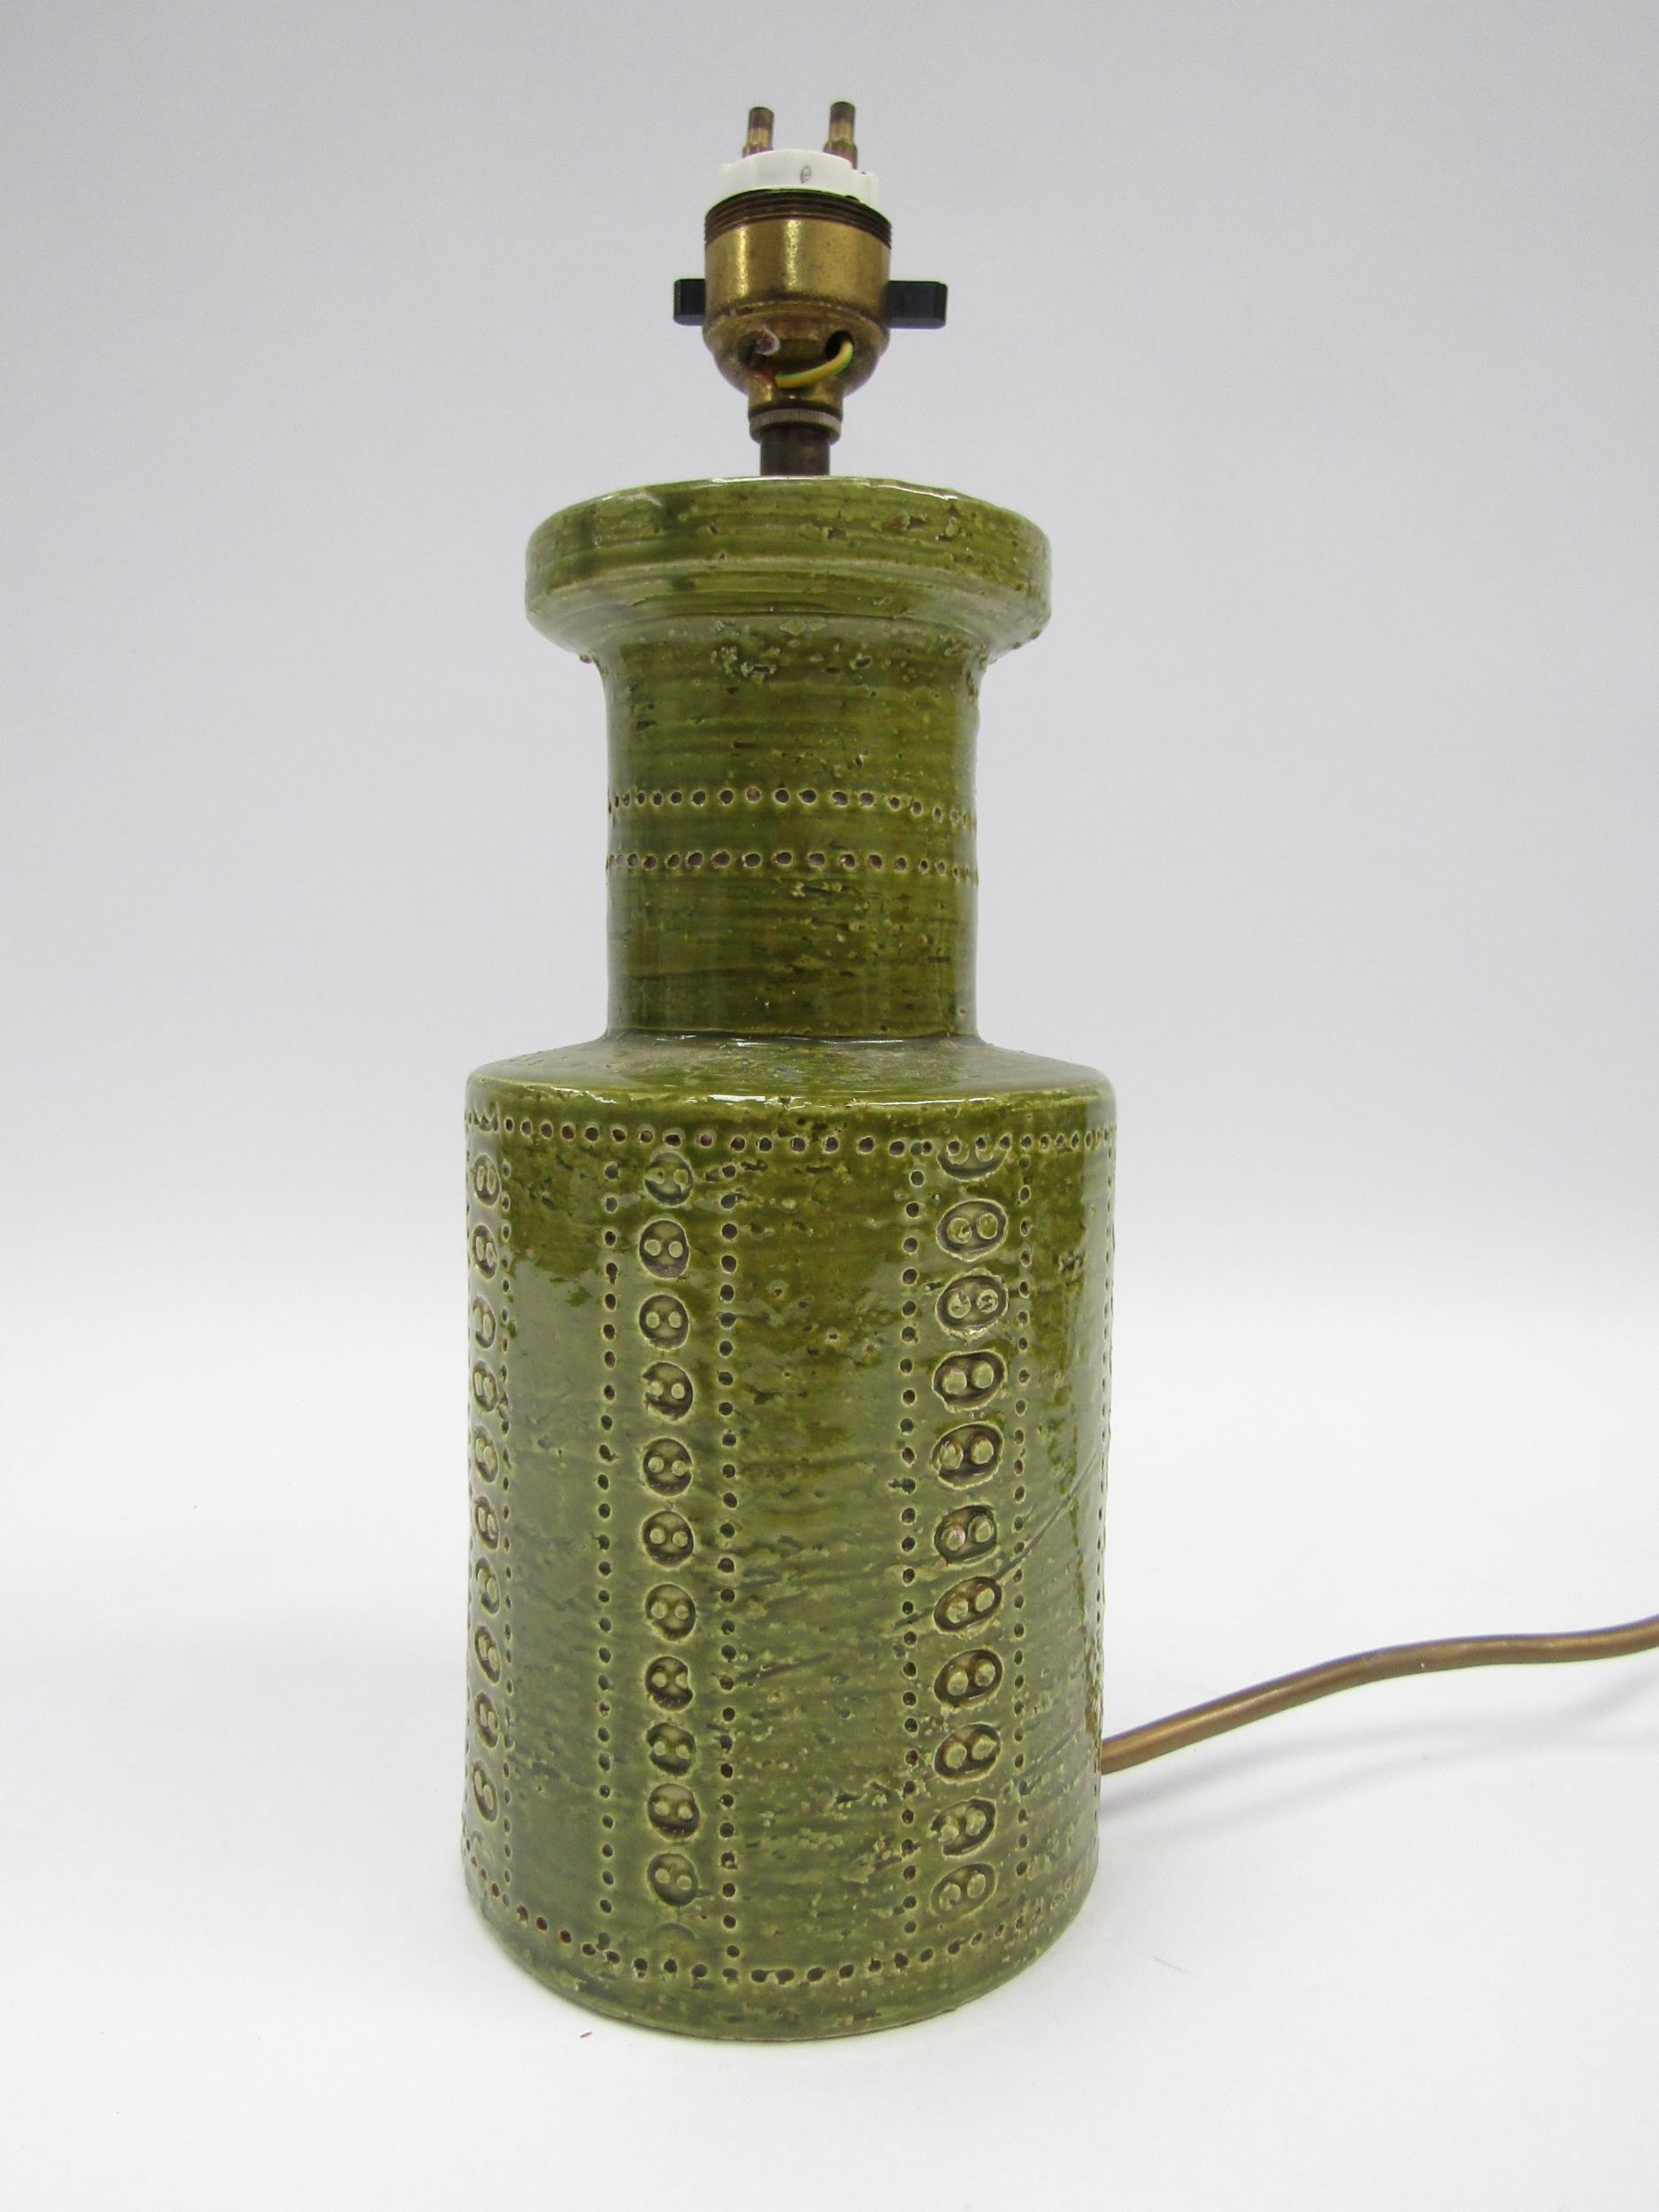 An Italian Bitossi lamp base with green glaze and impressed motif detail, 21.5cm high without - Image 2 of 3